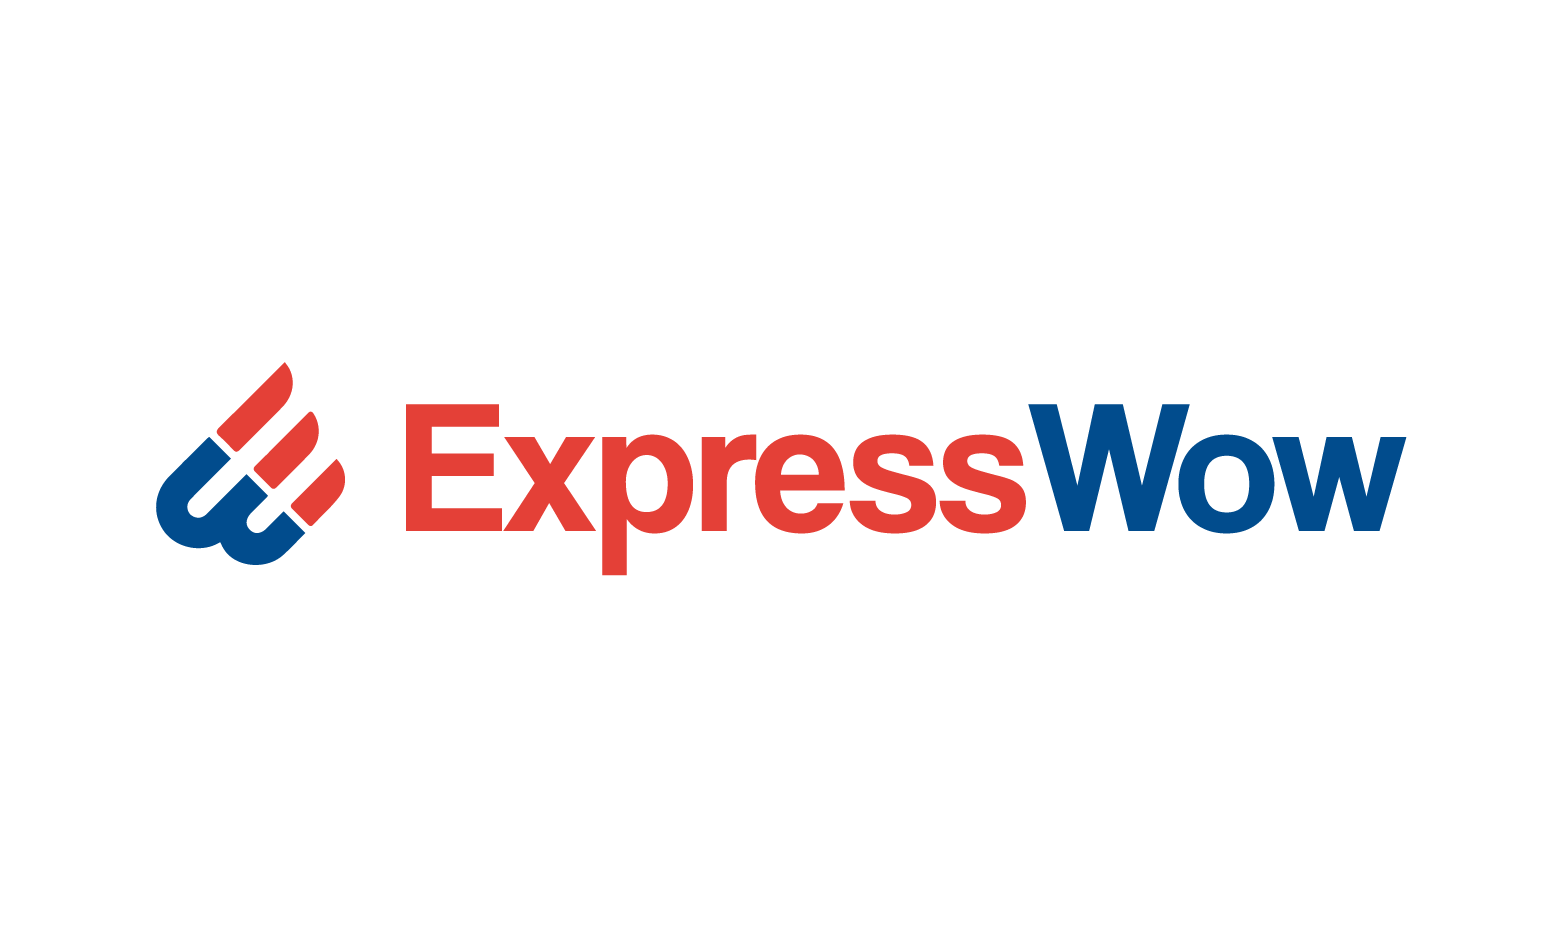 ExpressWow.com - Creative brandable domain for sale